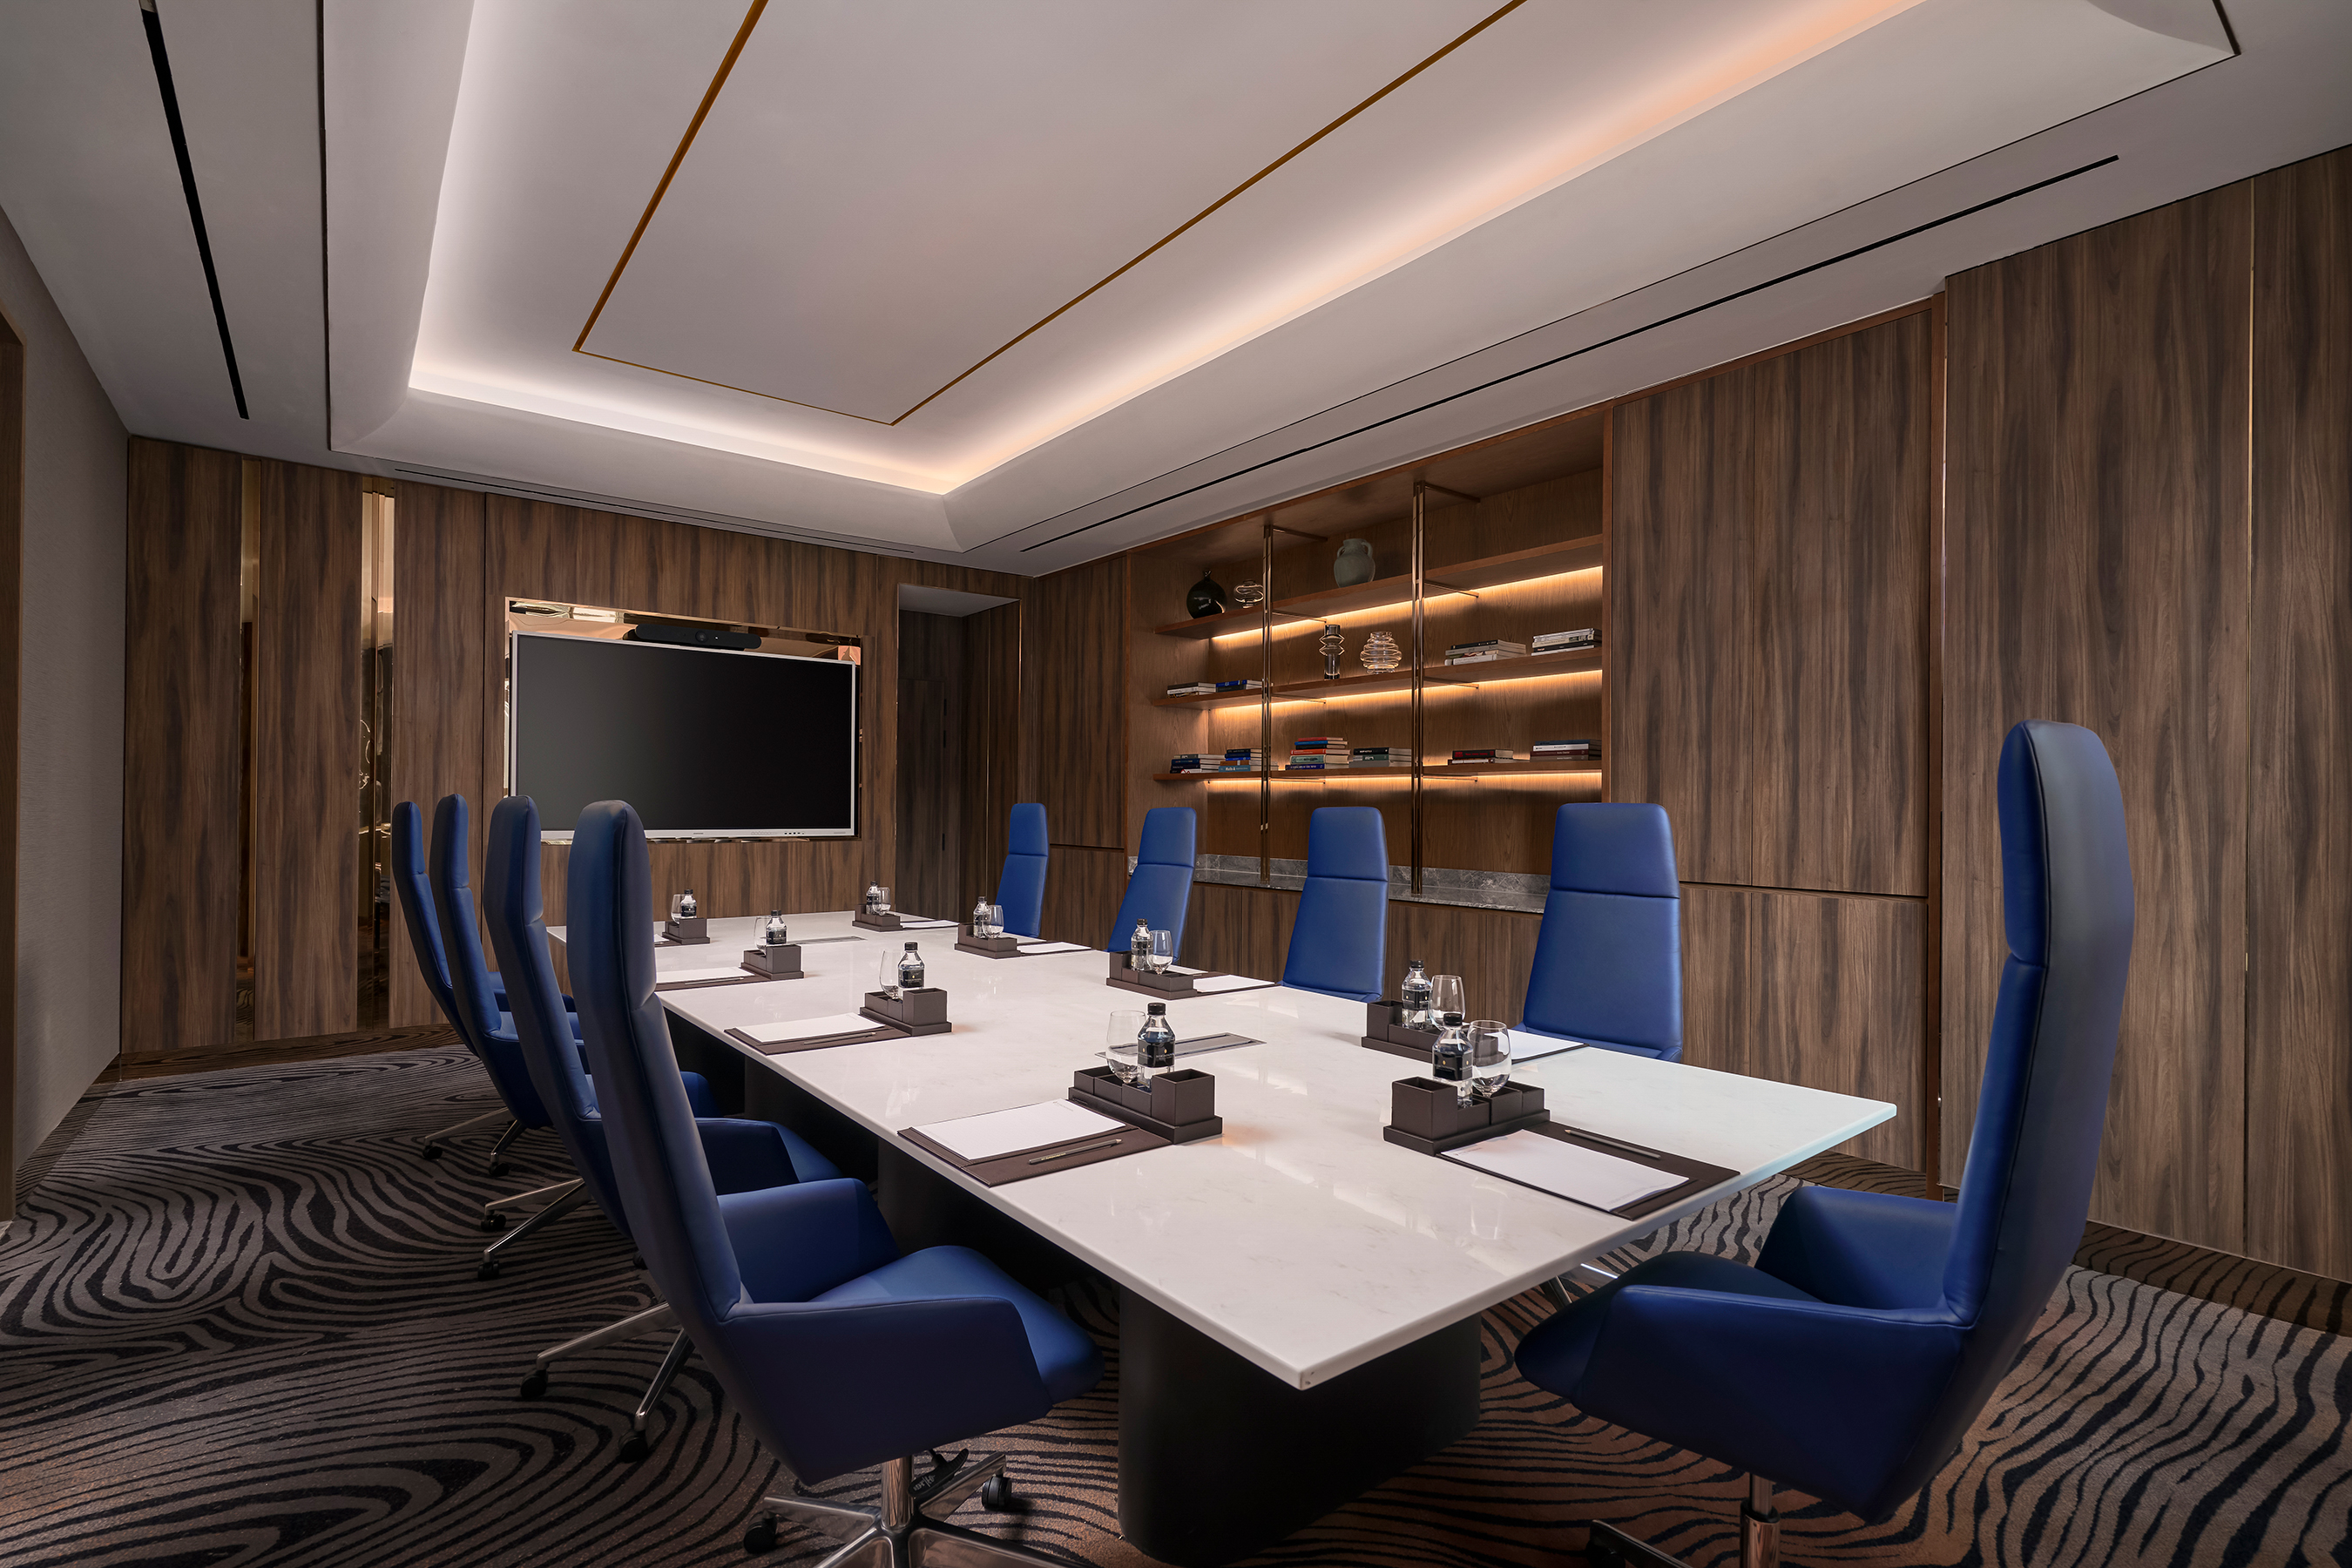 The Cham boardroom provides 12 seats for a private business gathering or an executive meeting. Featuring latest audio-visual equipment and natural lighting, your meeting will be delivered by a highly-trained team focused on understanding your needs and staging an event that is tailored to you.